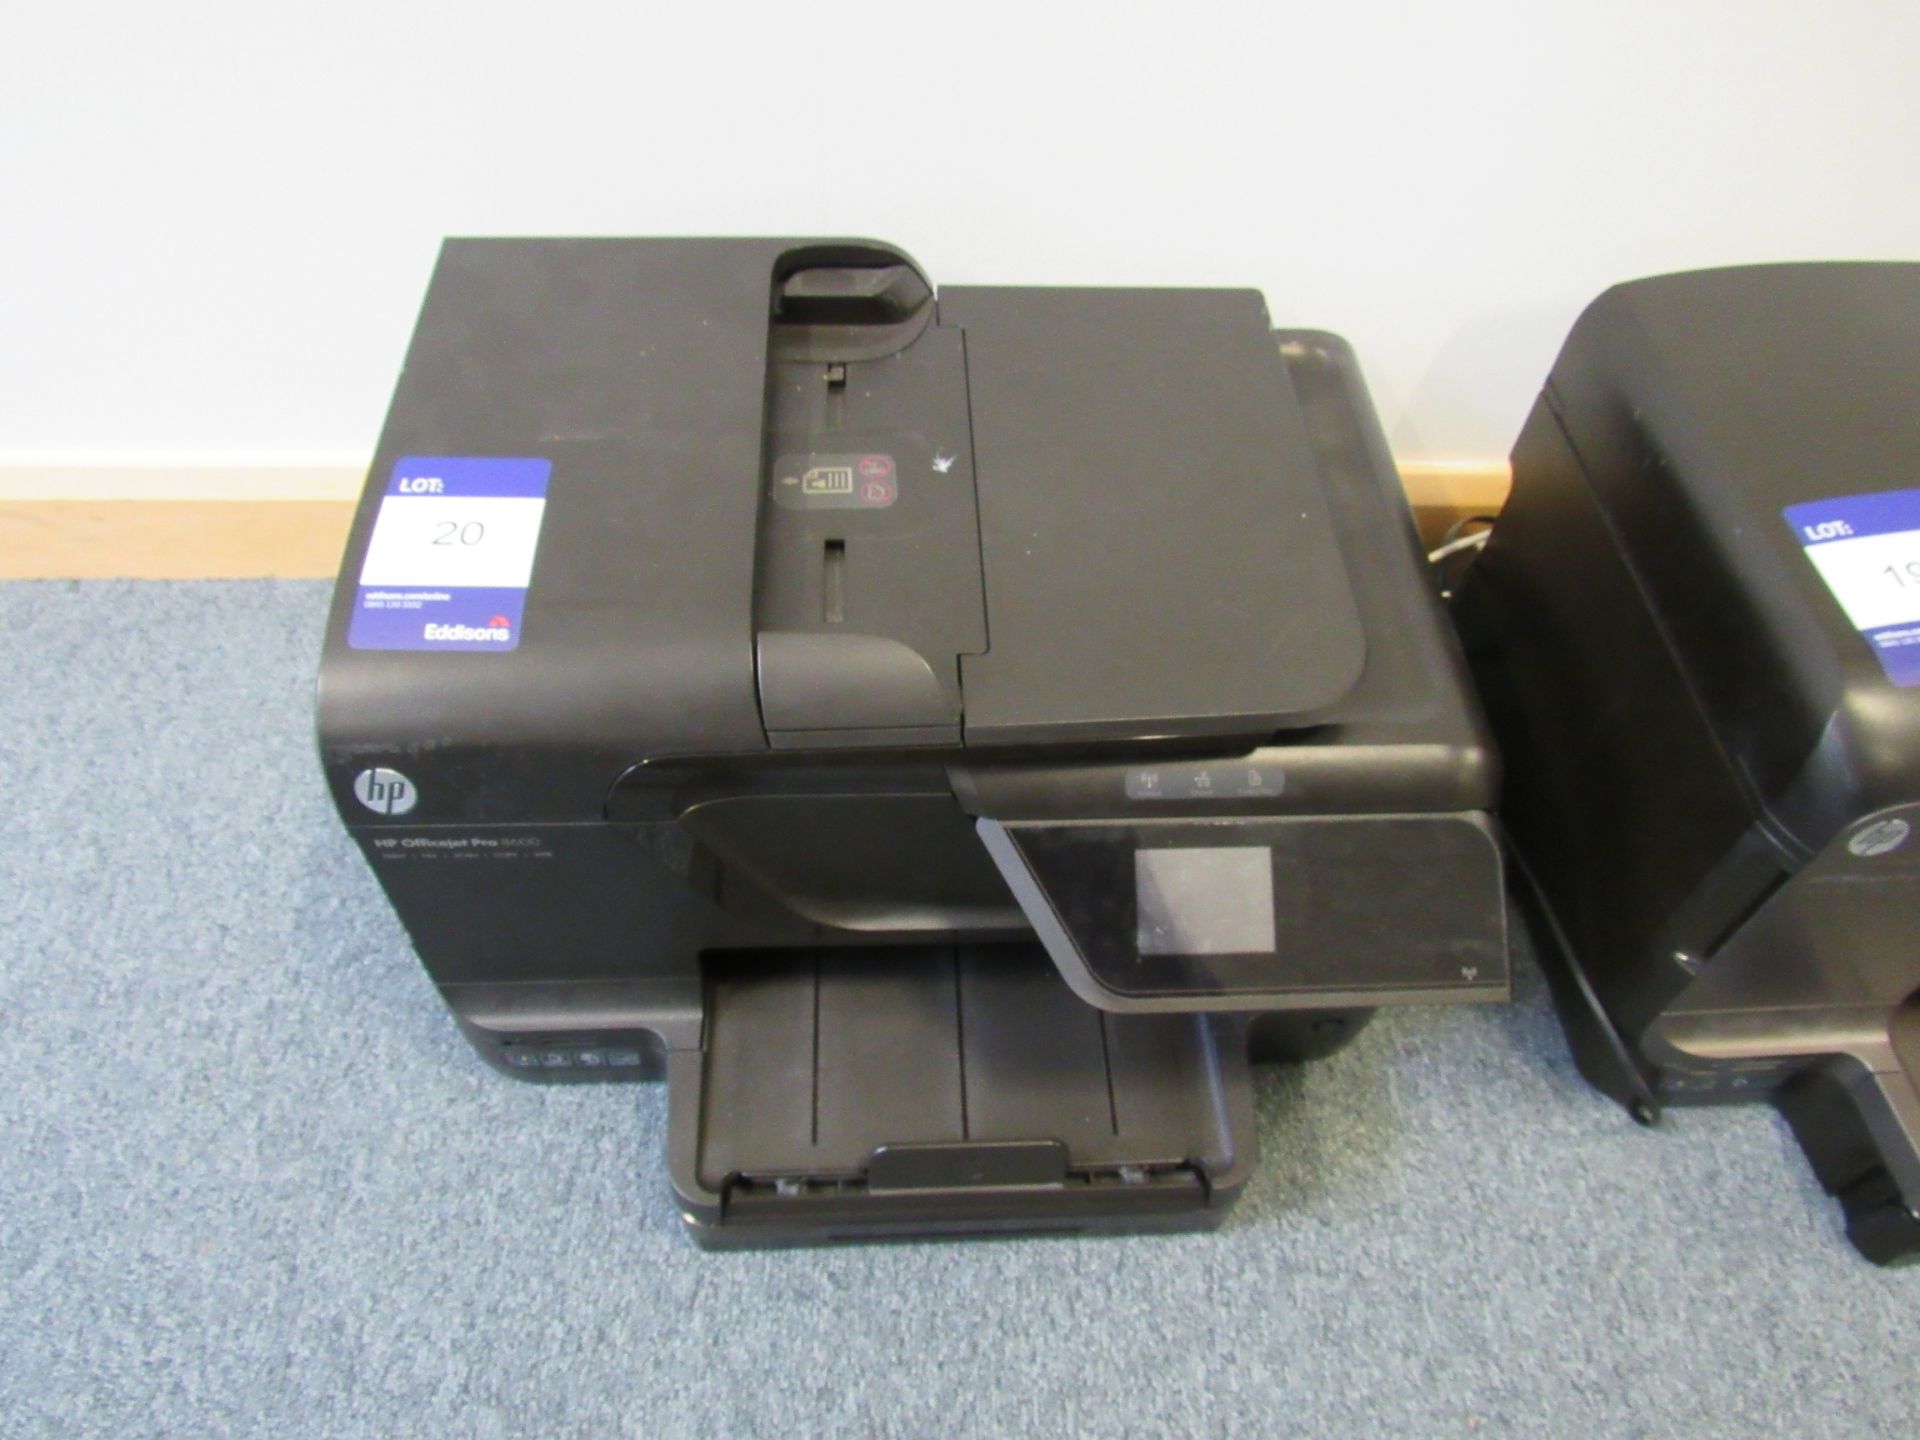 HP Officejet 8600 All in One Fax/Scan/Printer/Copier